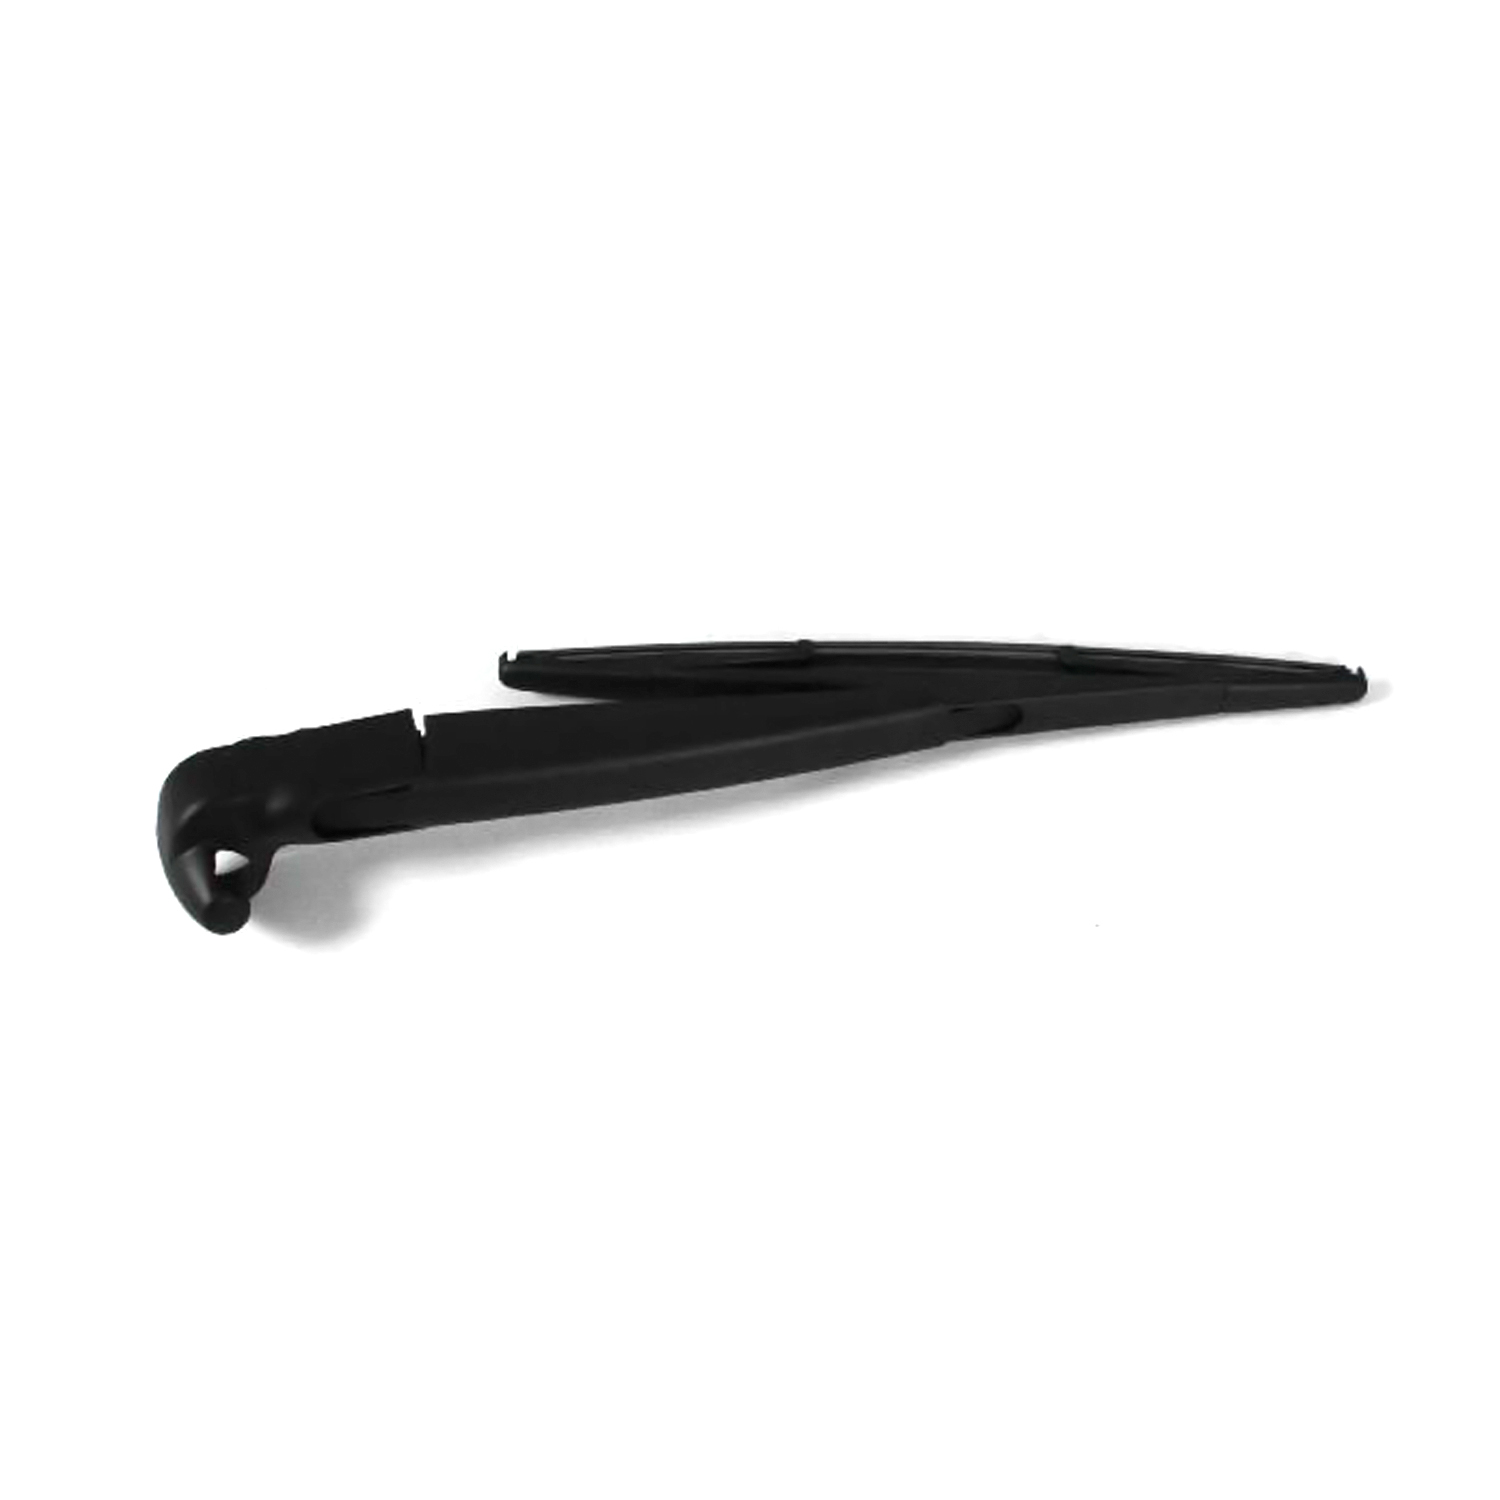 MOPAR PARTS - Back Glass Wiper Arm and Blade Assembly - MOP 68002490AB